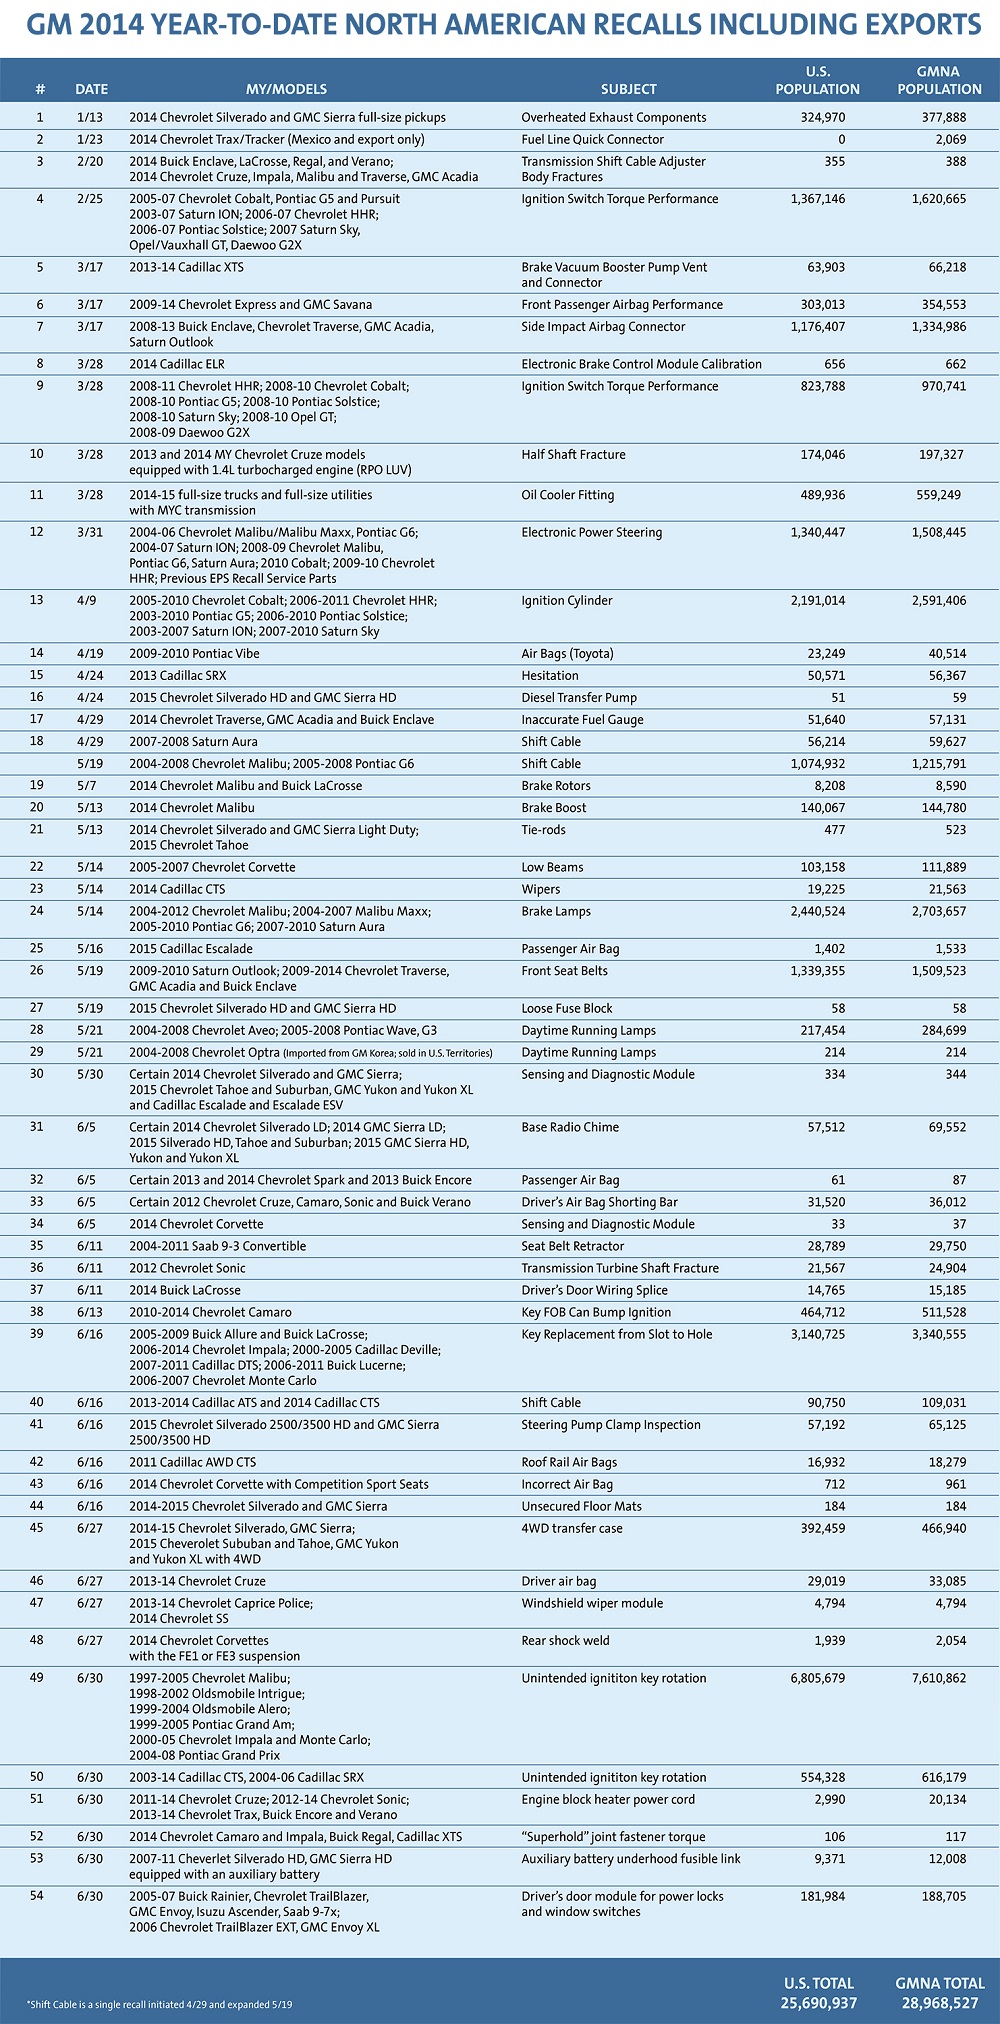 GM recalls for 2014 as of June 30, 2014